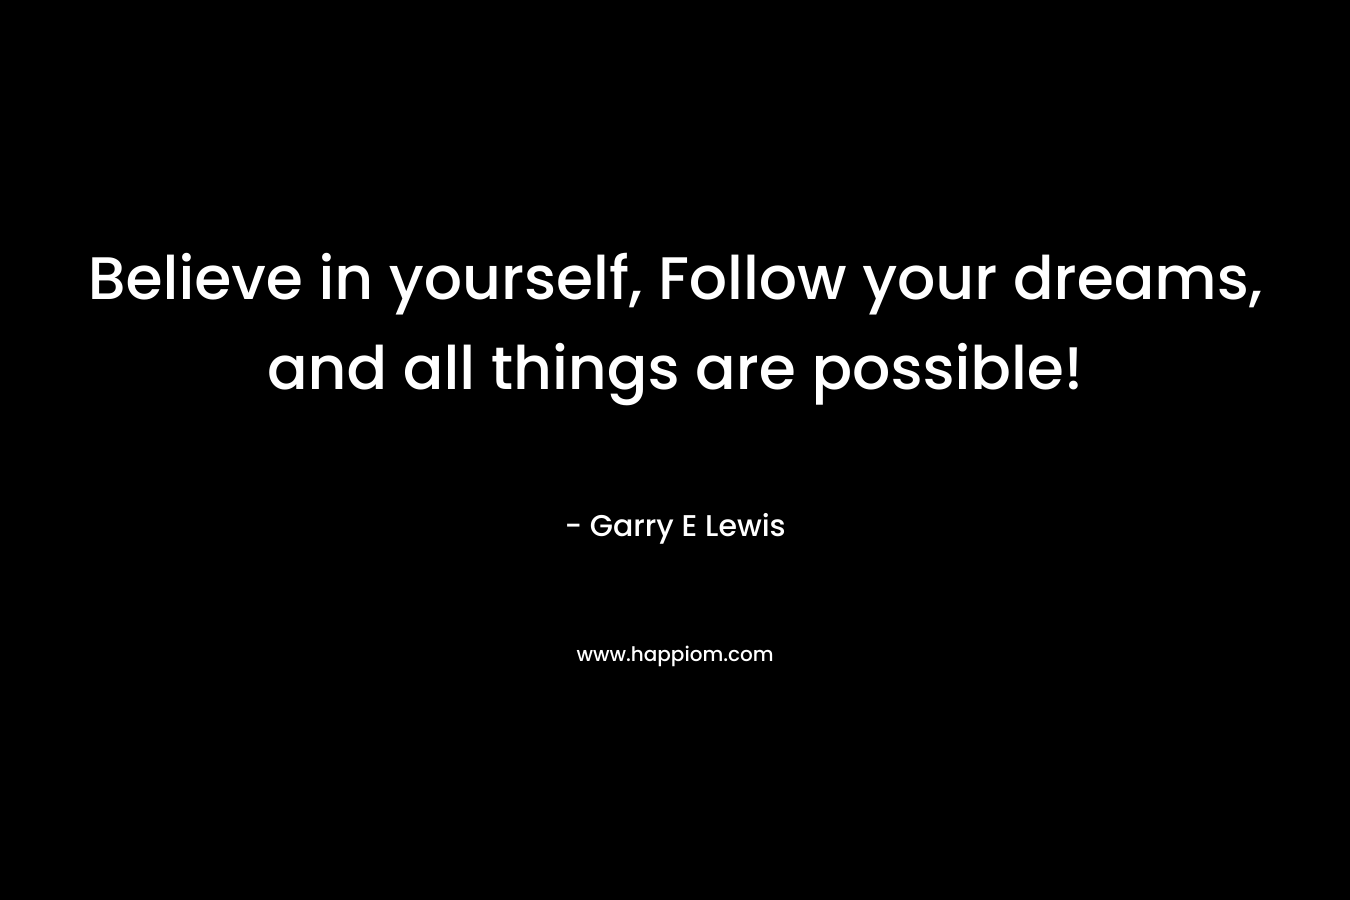 Believe in yourself, Follow your dreams, and all things are possible! – Garry E Lewis